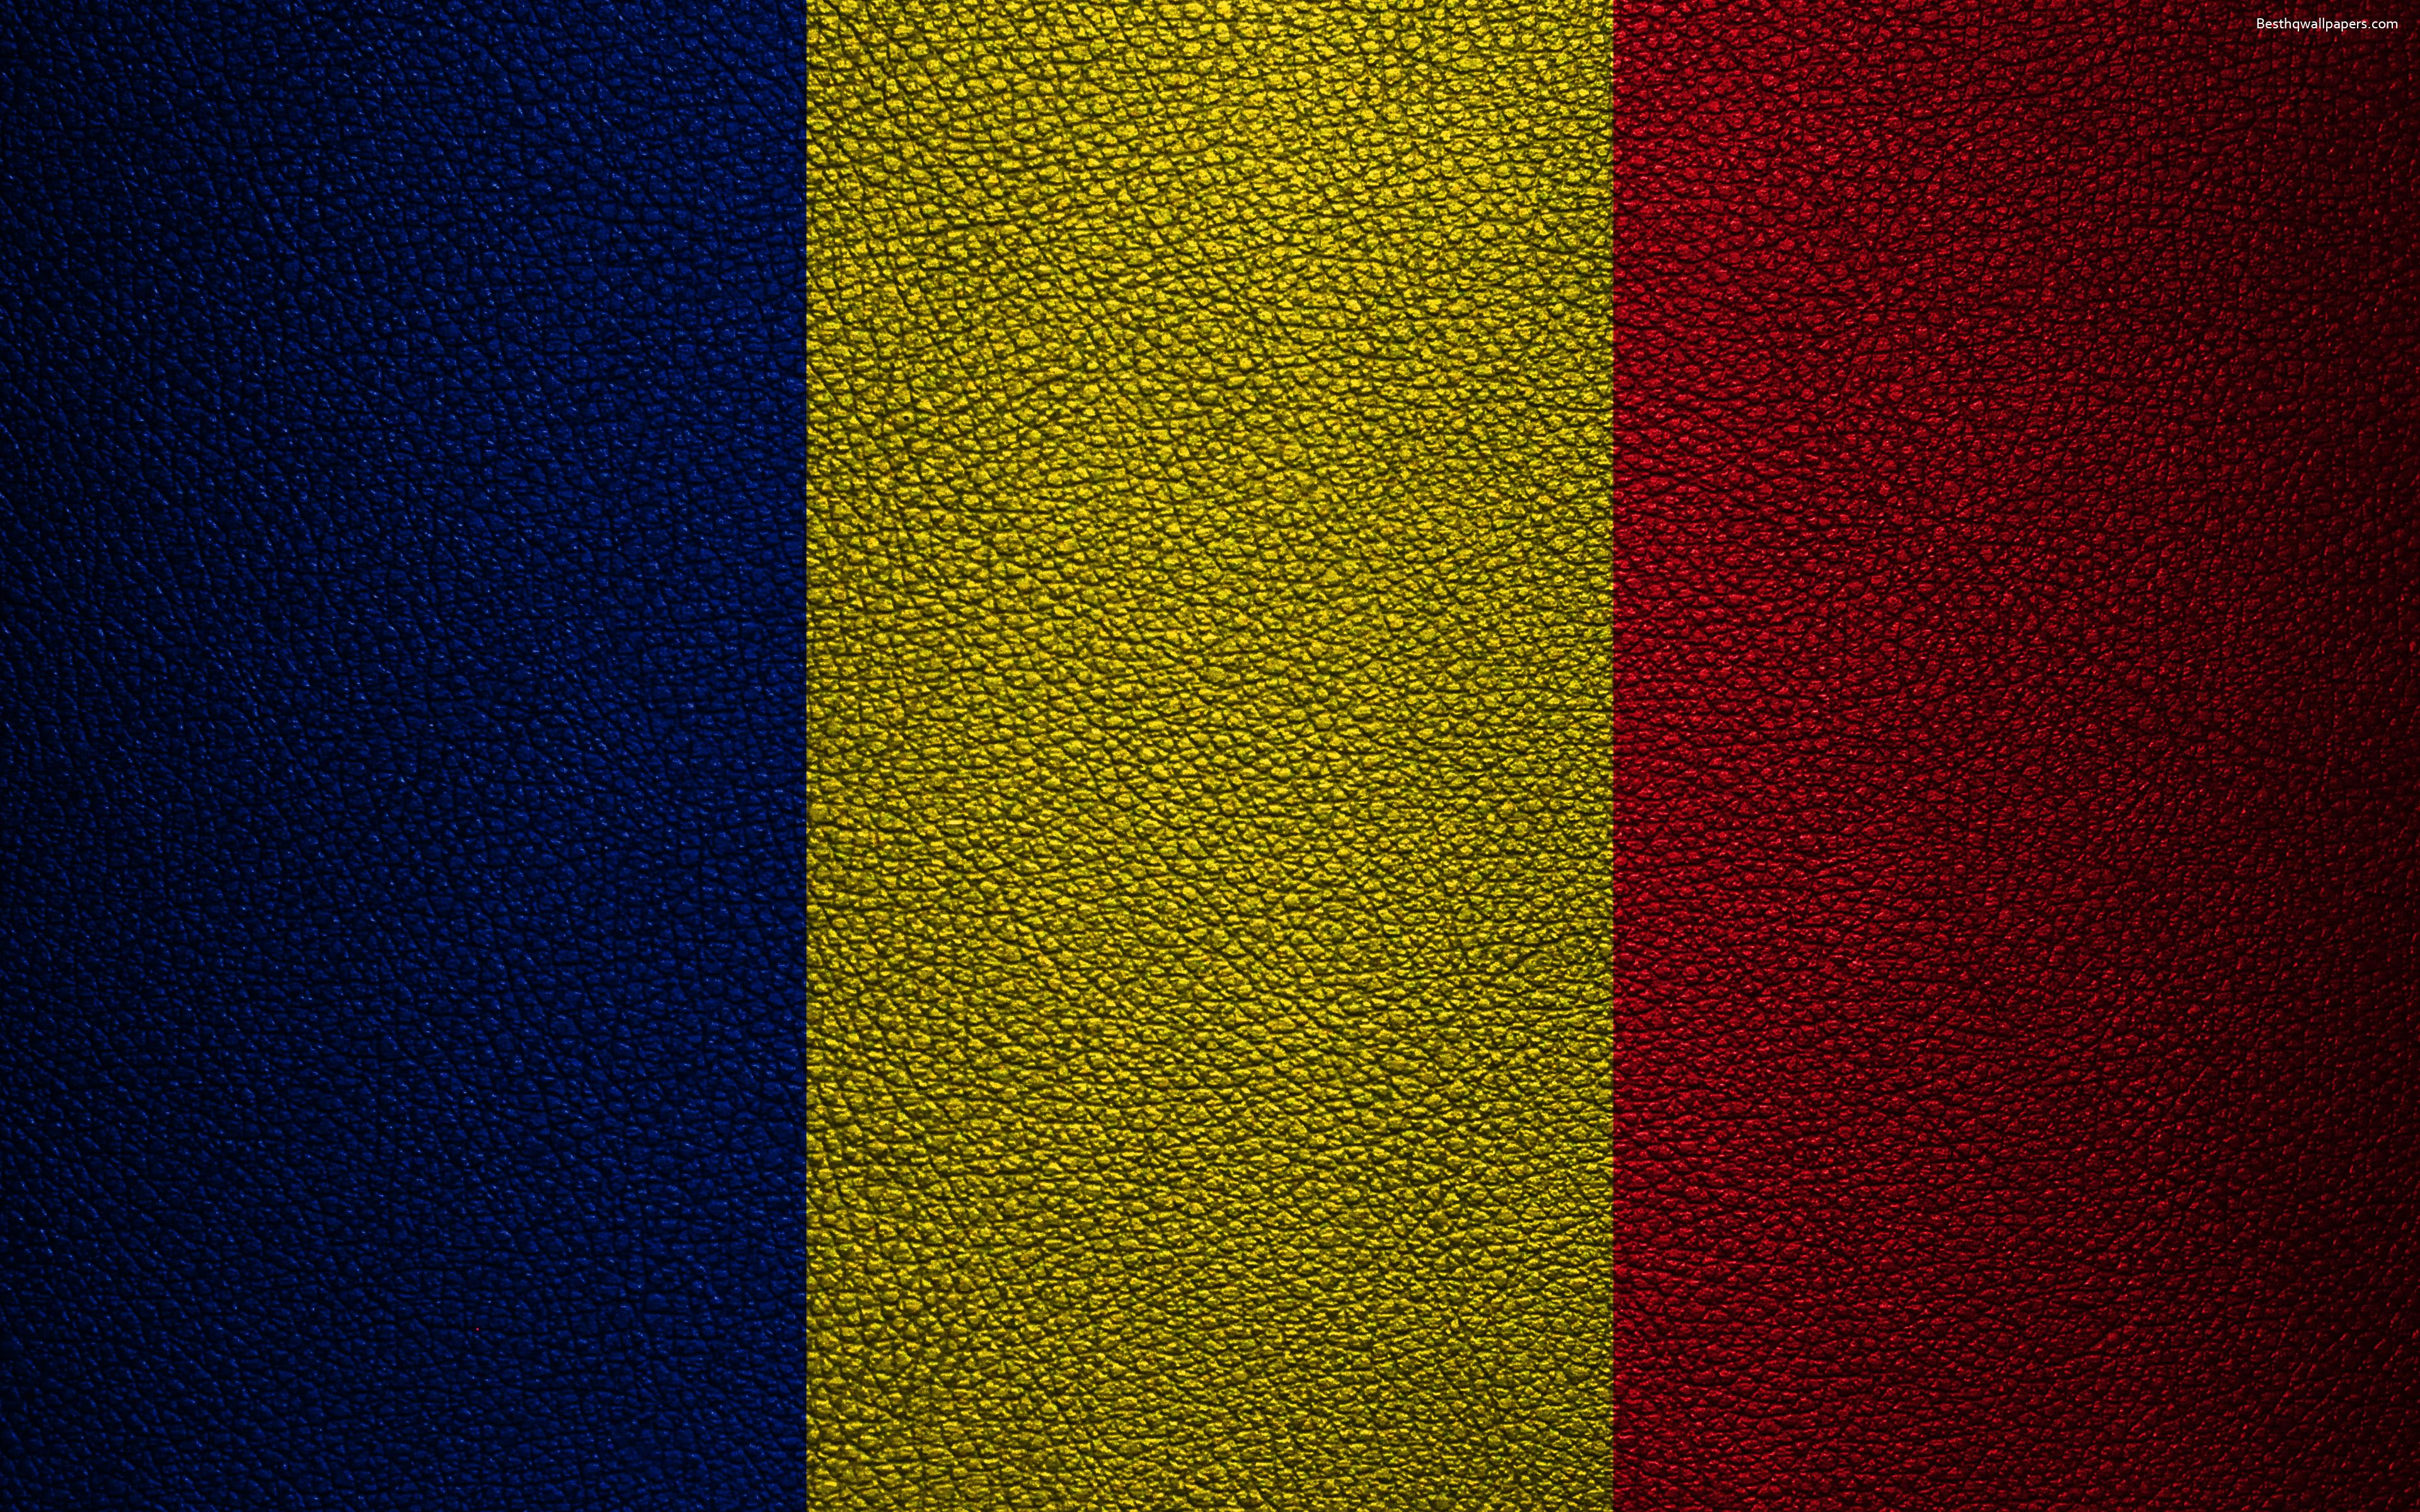 Download wallpaper Flag of Romania, 4k, leather texture, Romanian flag, Europe, flags of Europe, Romania for desktop with resolution 3840x2400. High Quality HD picture wallpaper